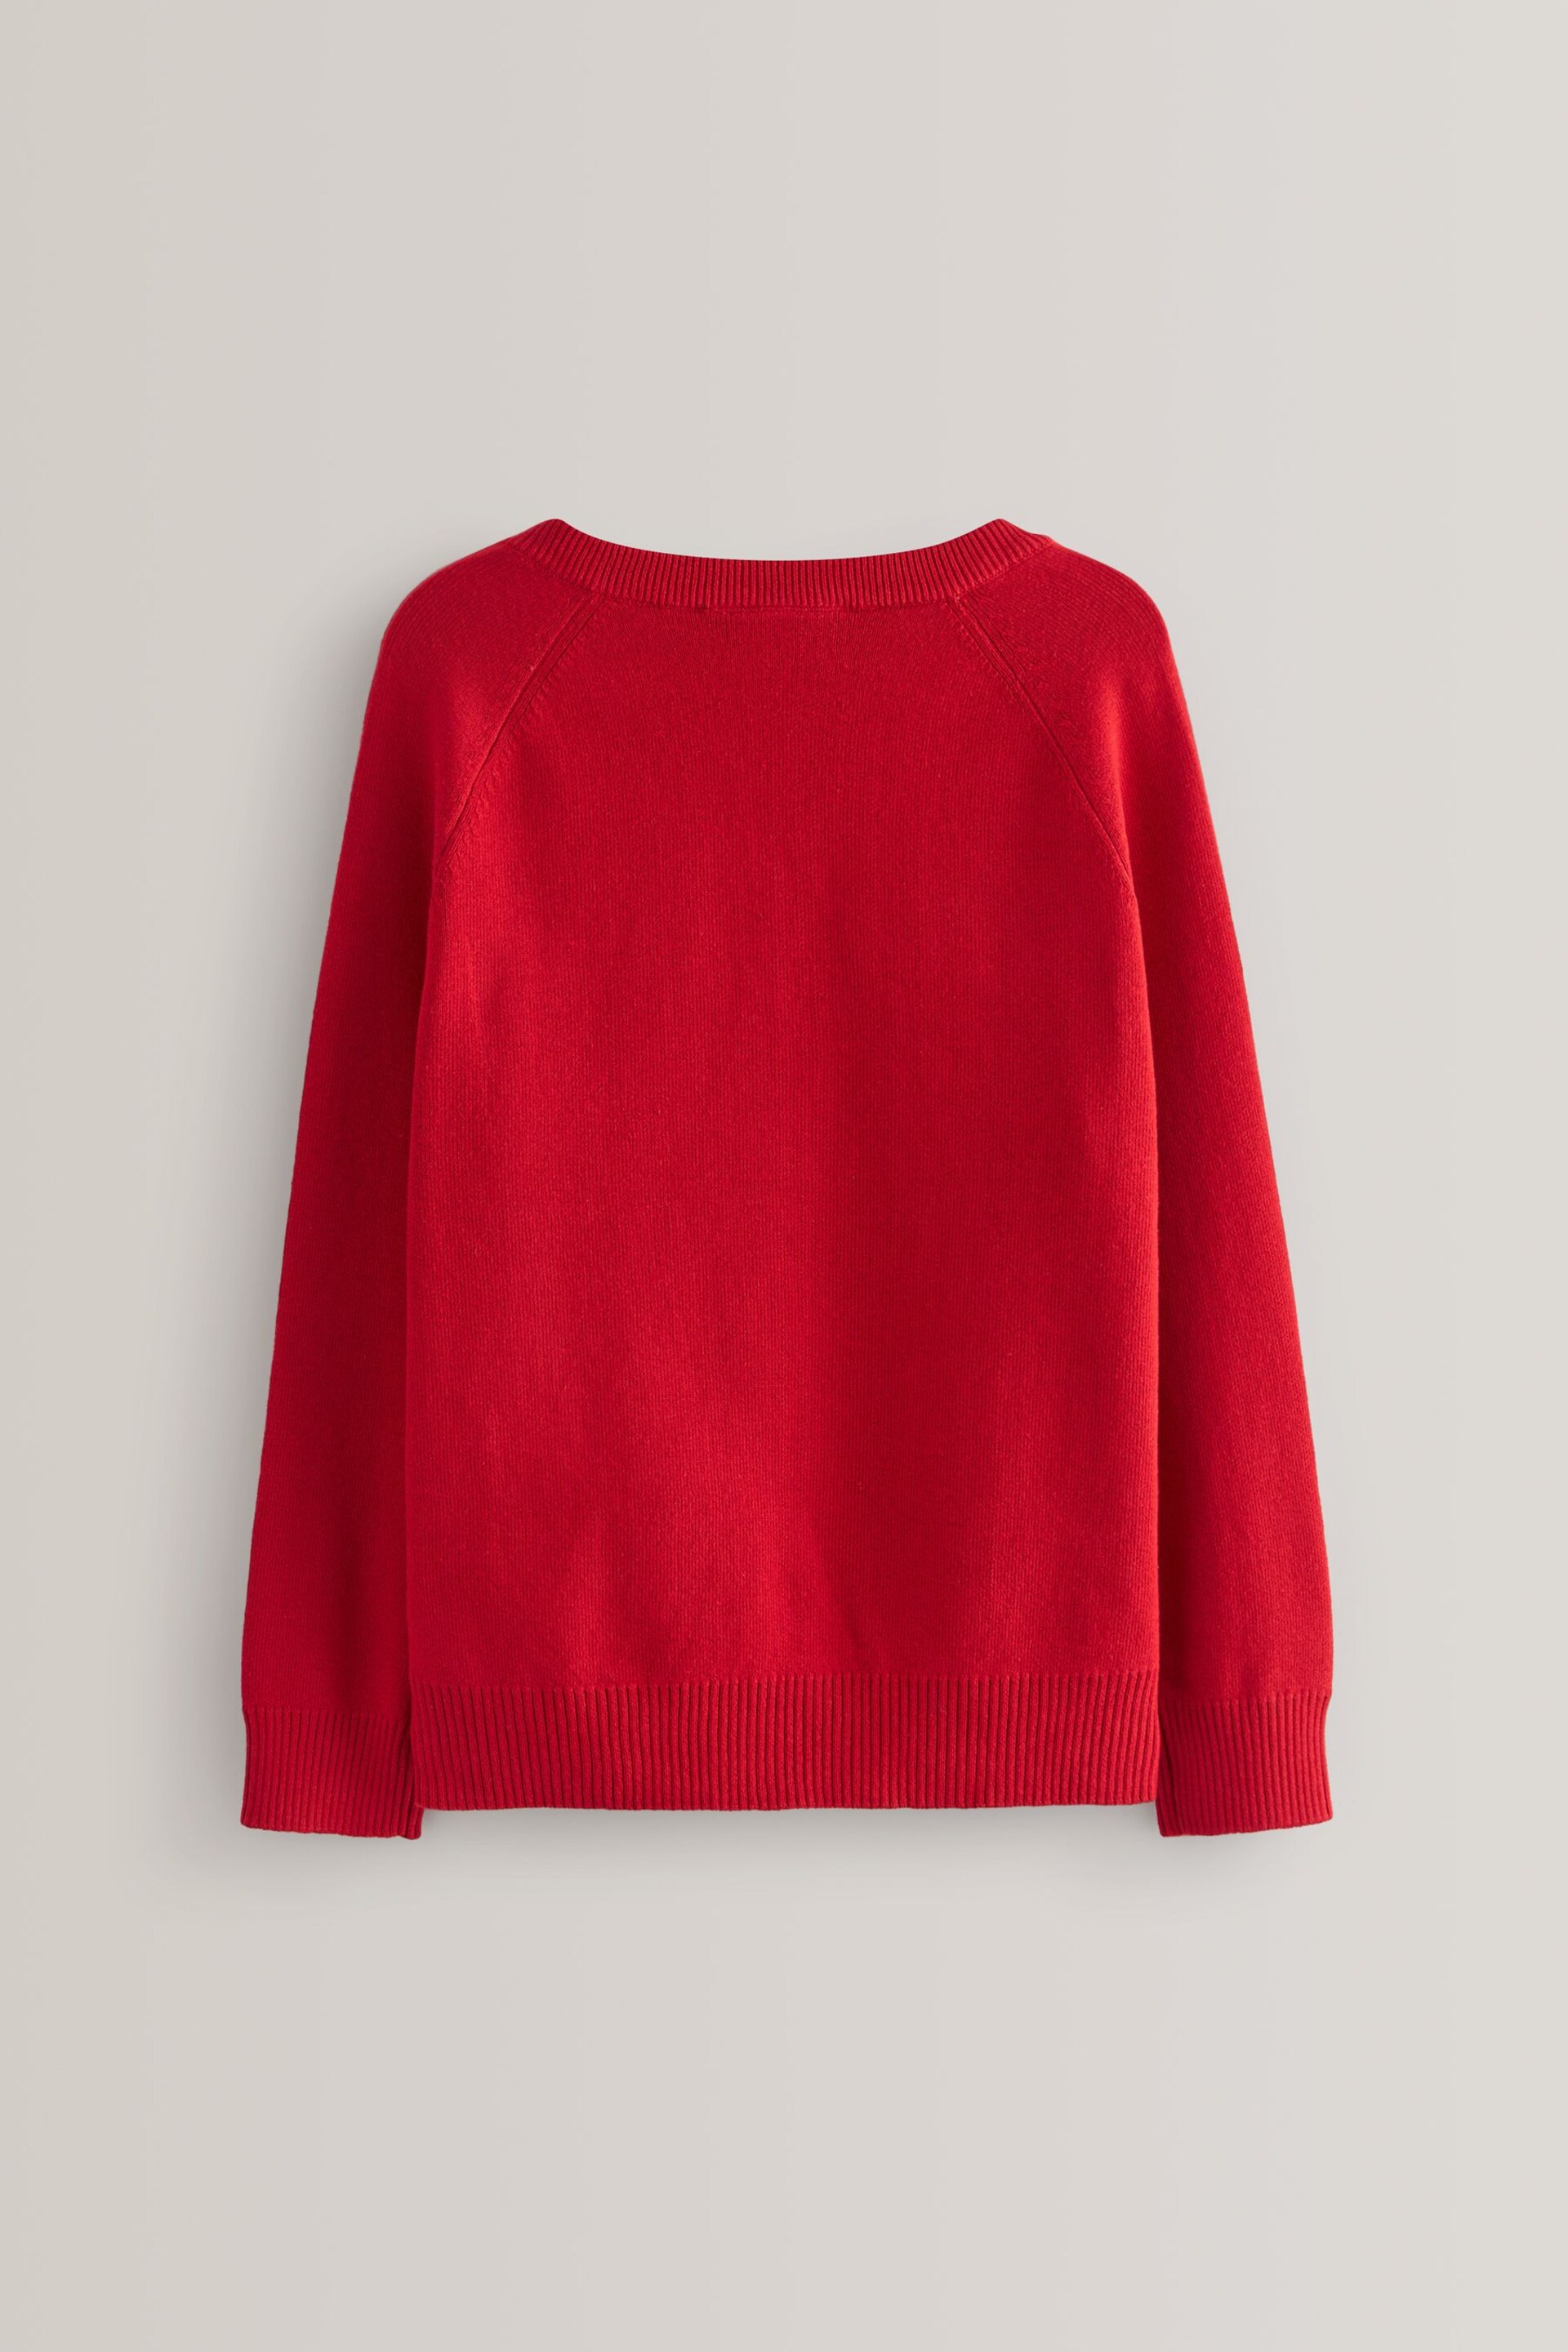 Red Knitted V-Neck School Jumper (3-18yrs) - Image 2 of 2